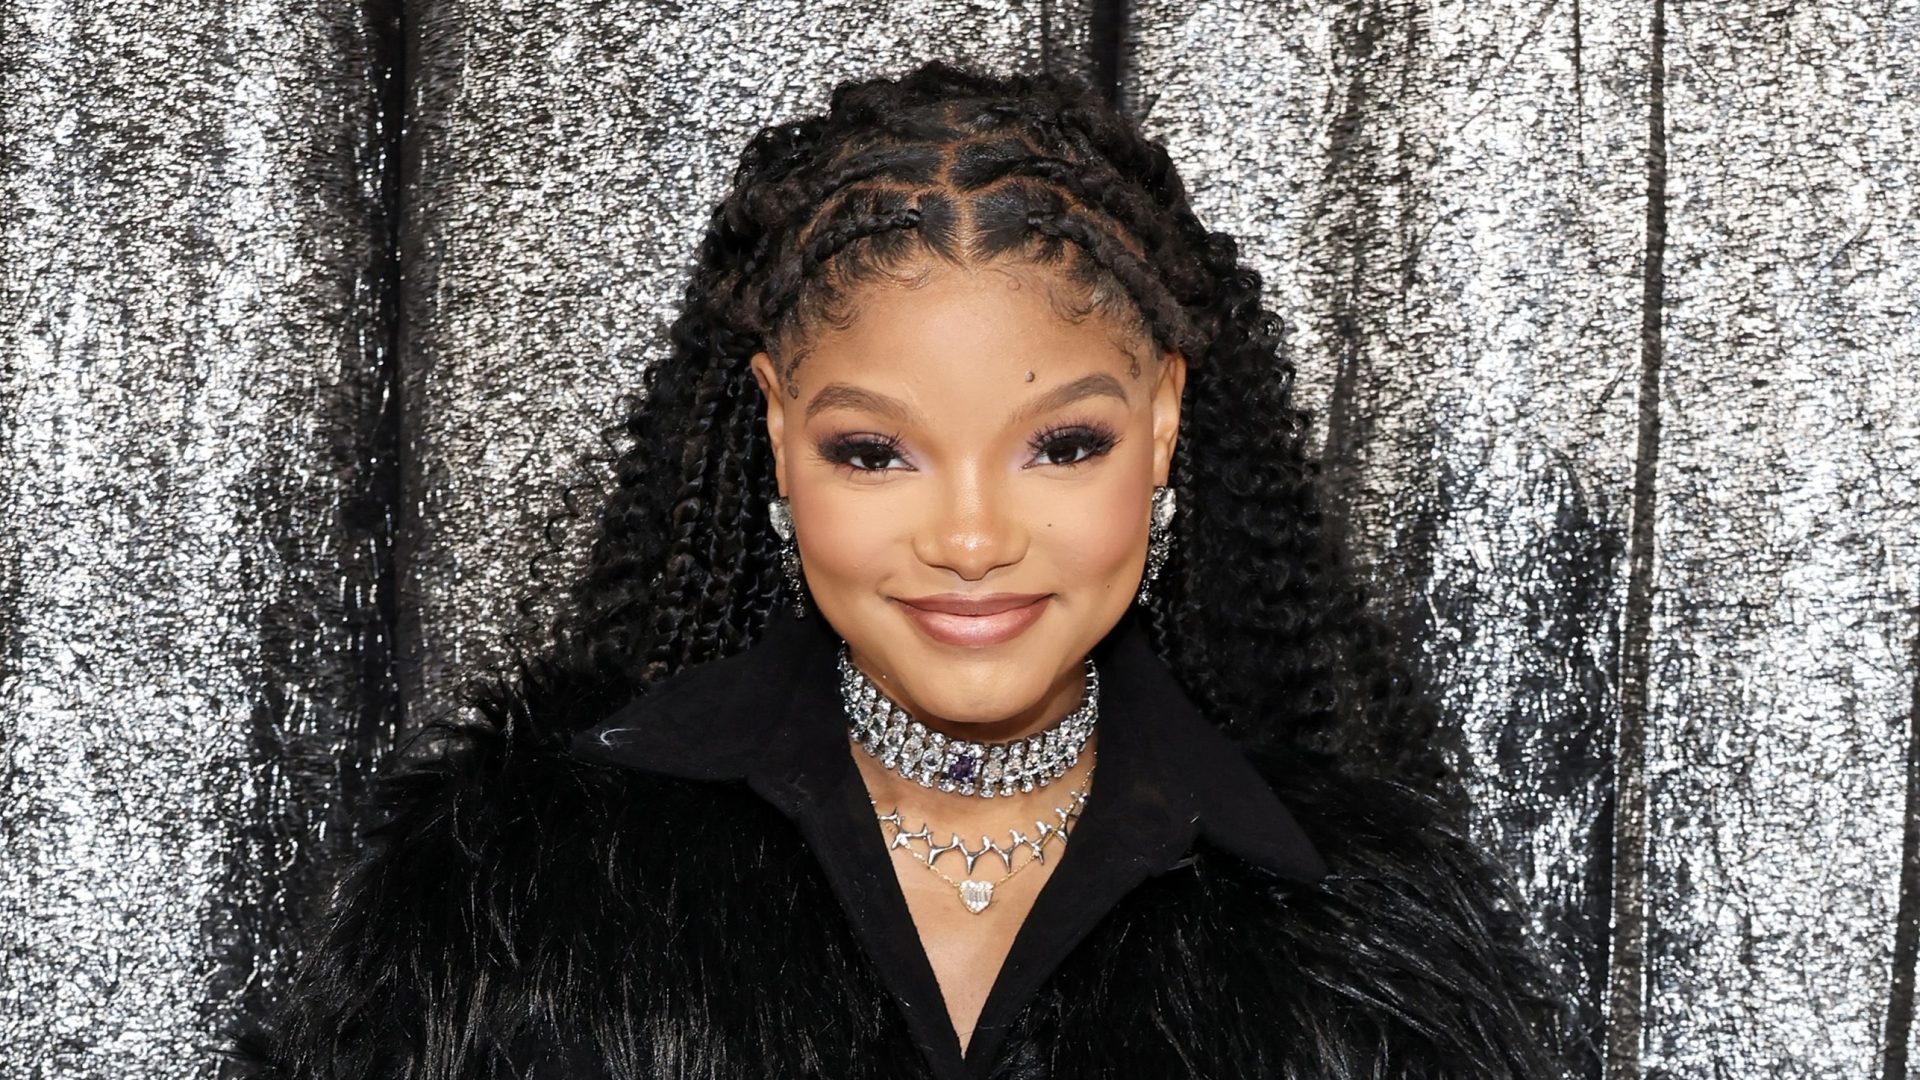 BEVERLY HILLS, CALIFORNIA - NOVEMBER 25: (Editorial Use Only) (Exclusive Coverage) Halle Bailey attends the World Premiere of "Renaissance: A Film By Beyoncé" at Samuel Goldwyn Theater on November 25, 2023 in Beverly Hills, California.